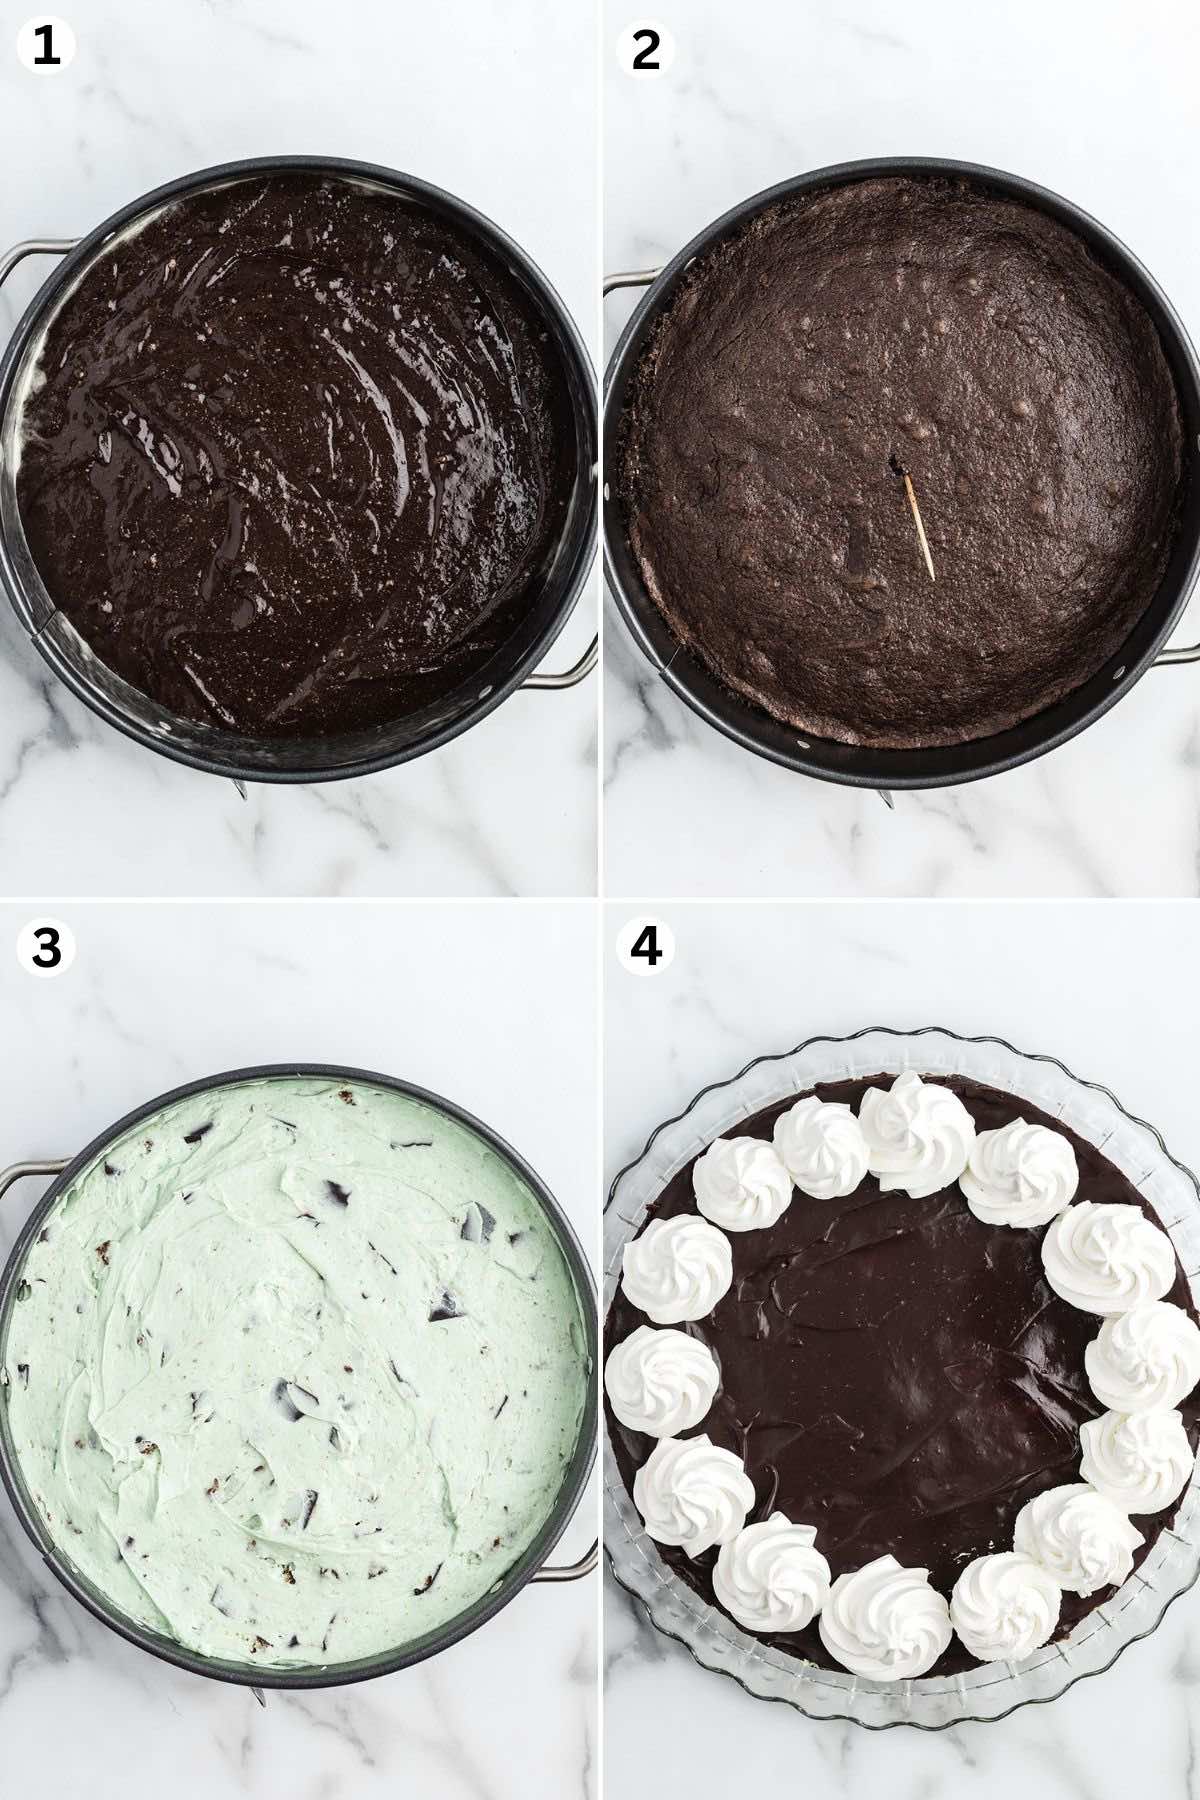 Pour the batter into the springform pan and bake. Spread the thin mint cheesecake mixture evenly over the cooled brownie crust layer. Spread the cool chocolate ganache over the cheesecake layer and decorate.